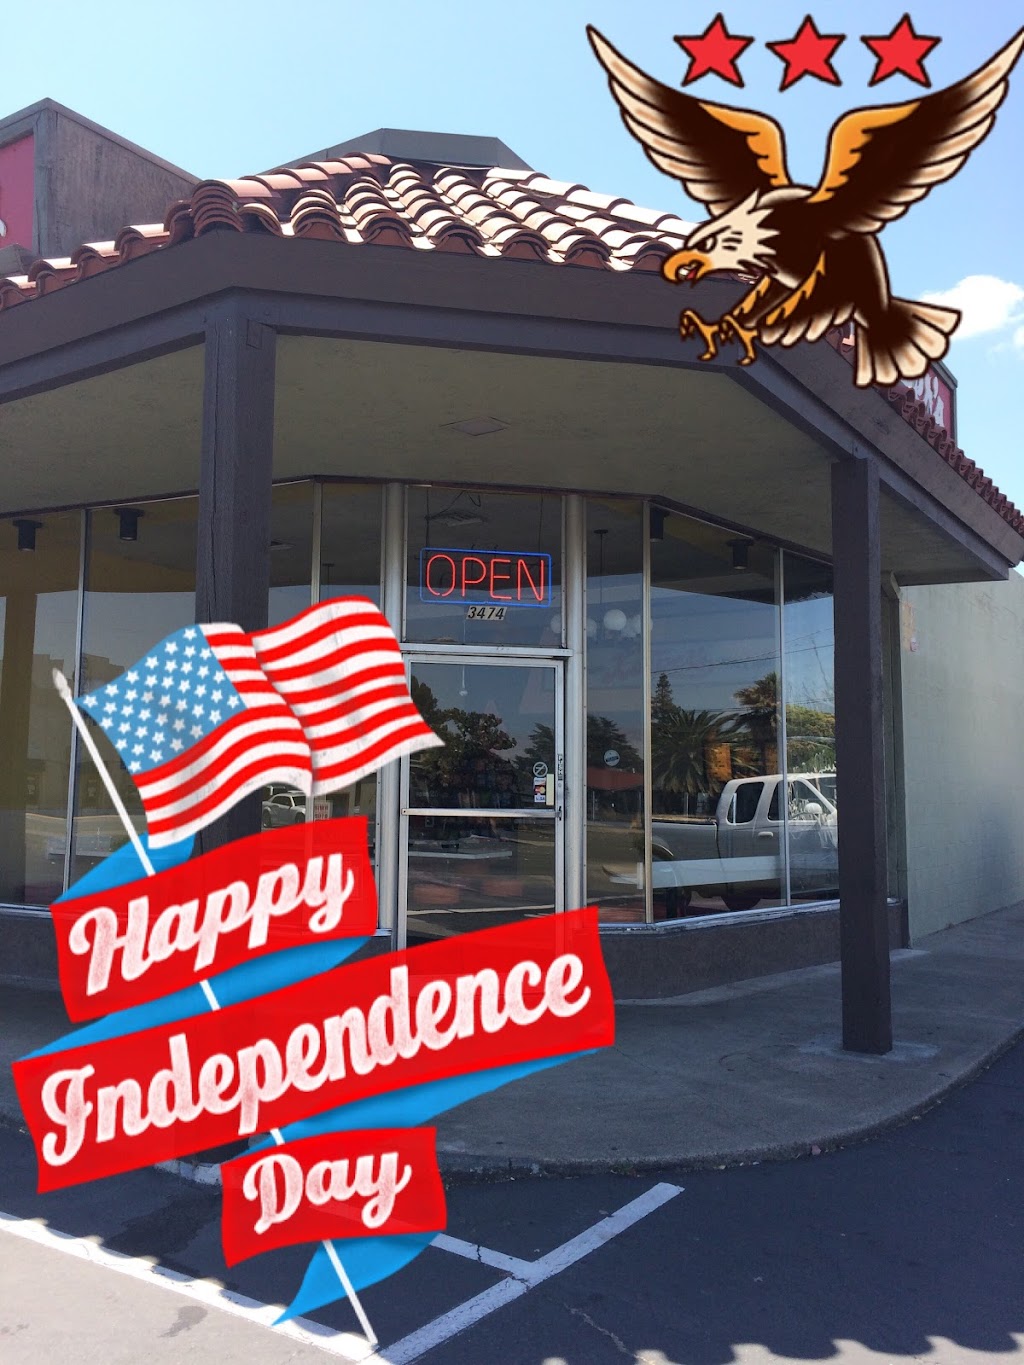 Kaspers Hot Dogs | 3474 Clayton Rd, Concord, CA 94519 | Phone: (925) 687-1651